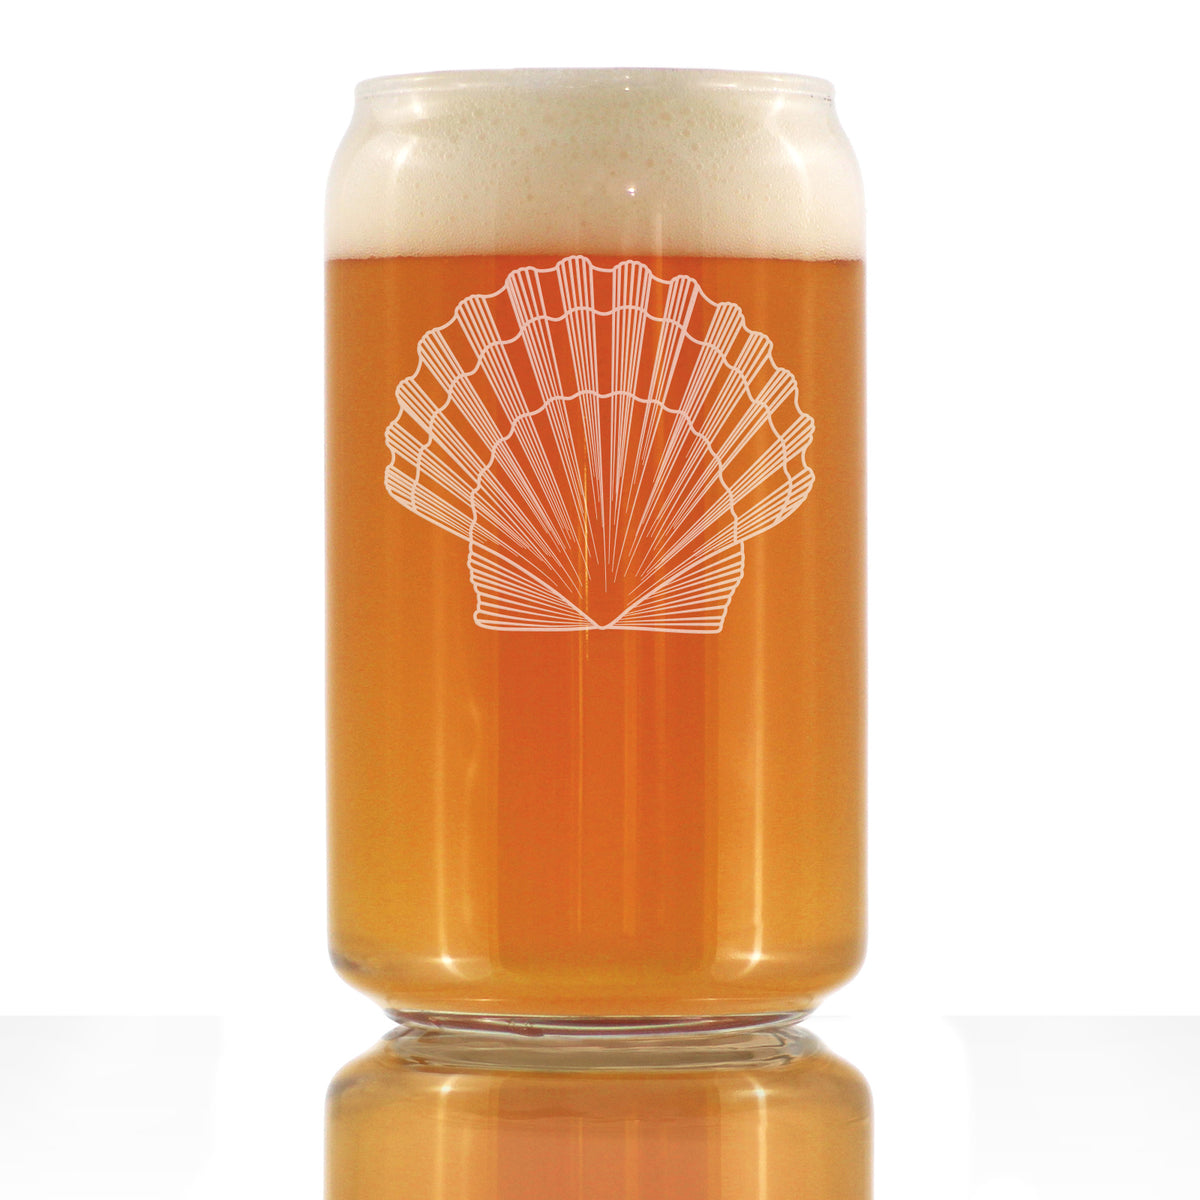 Seashell Engraved Beer Can Pint Glass, Unique Decorative Gift for Beach House, Nautical Decor Birthday Gifts with Seashells